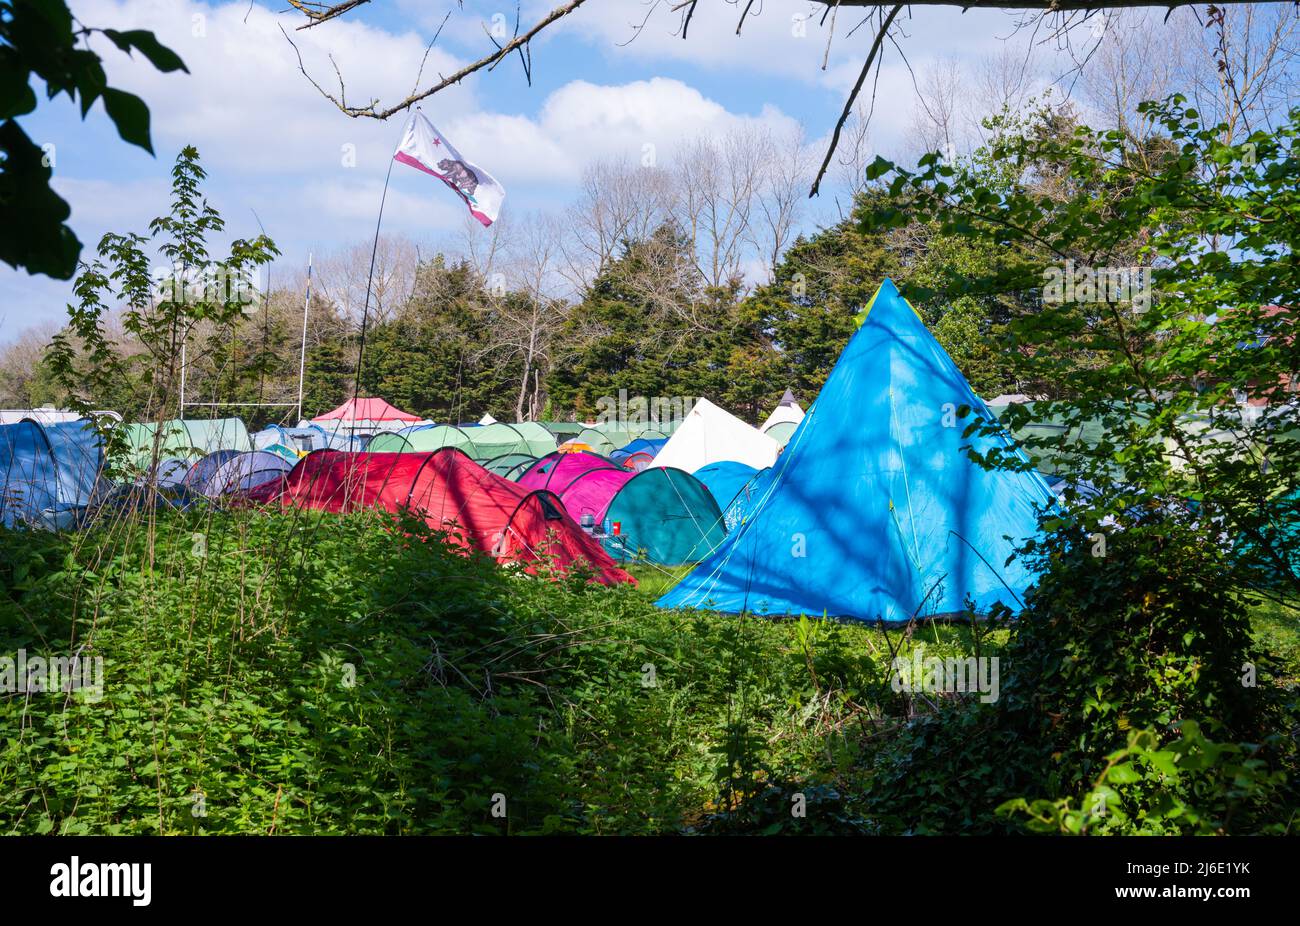 Several small different coloured tents set up in a field as part of a camping trip or event. Stock Photo